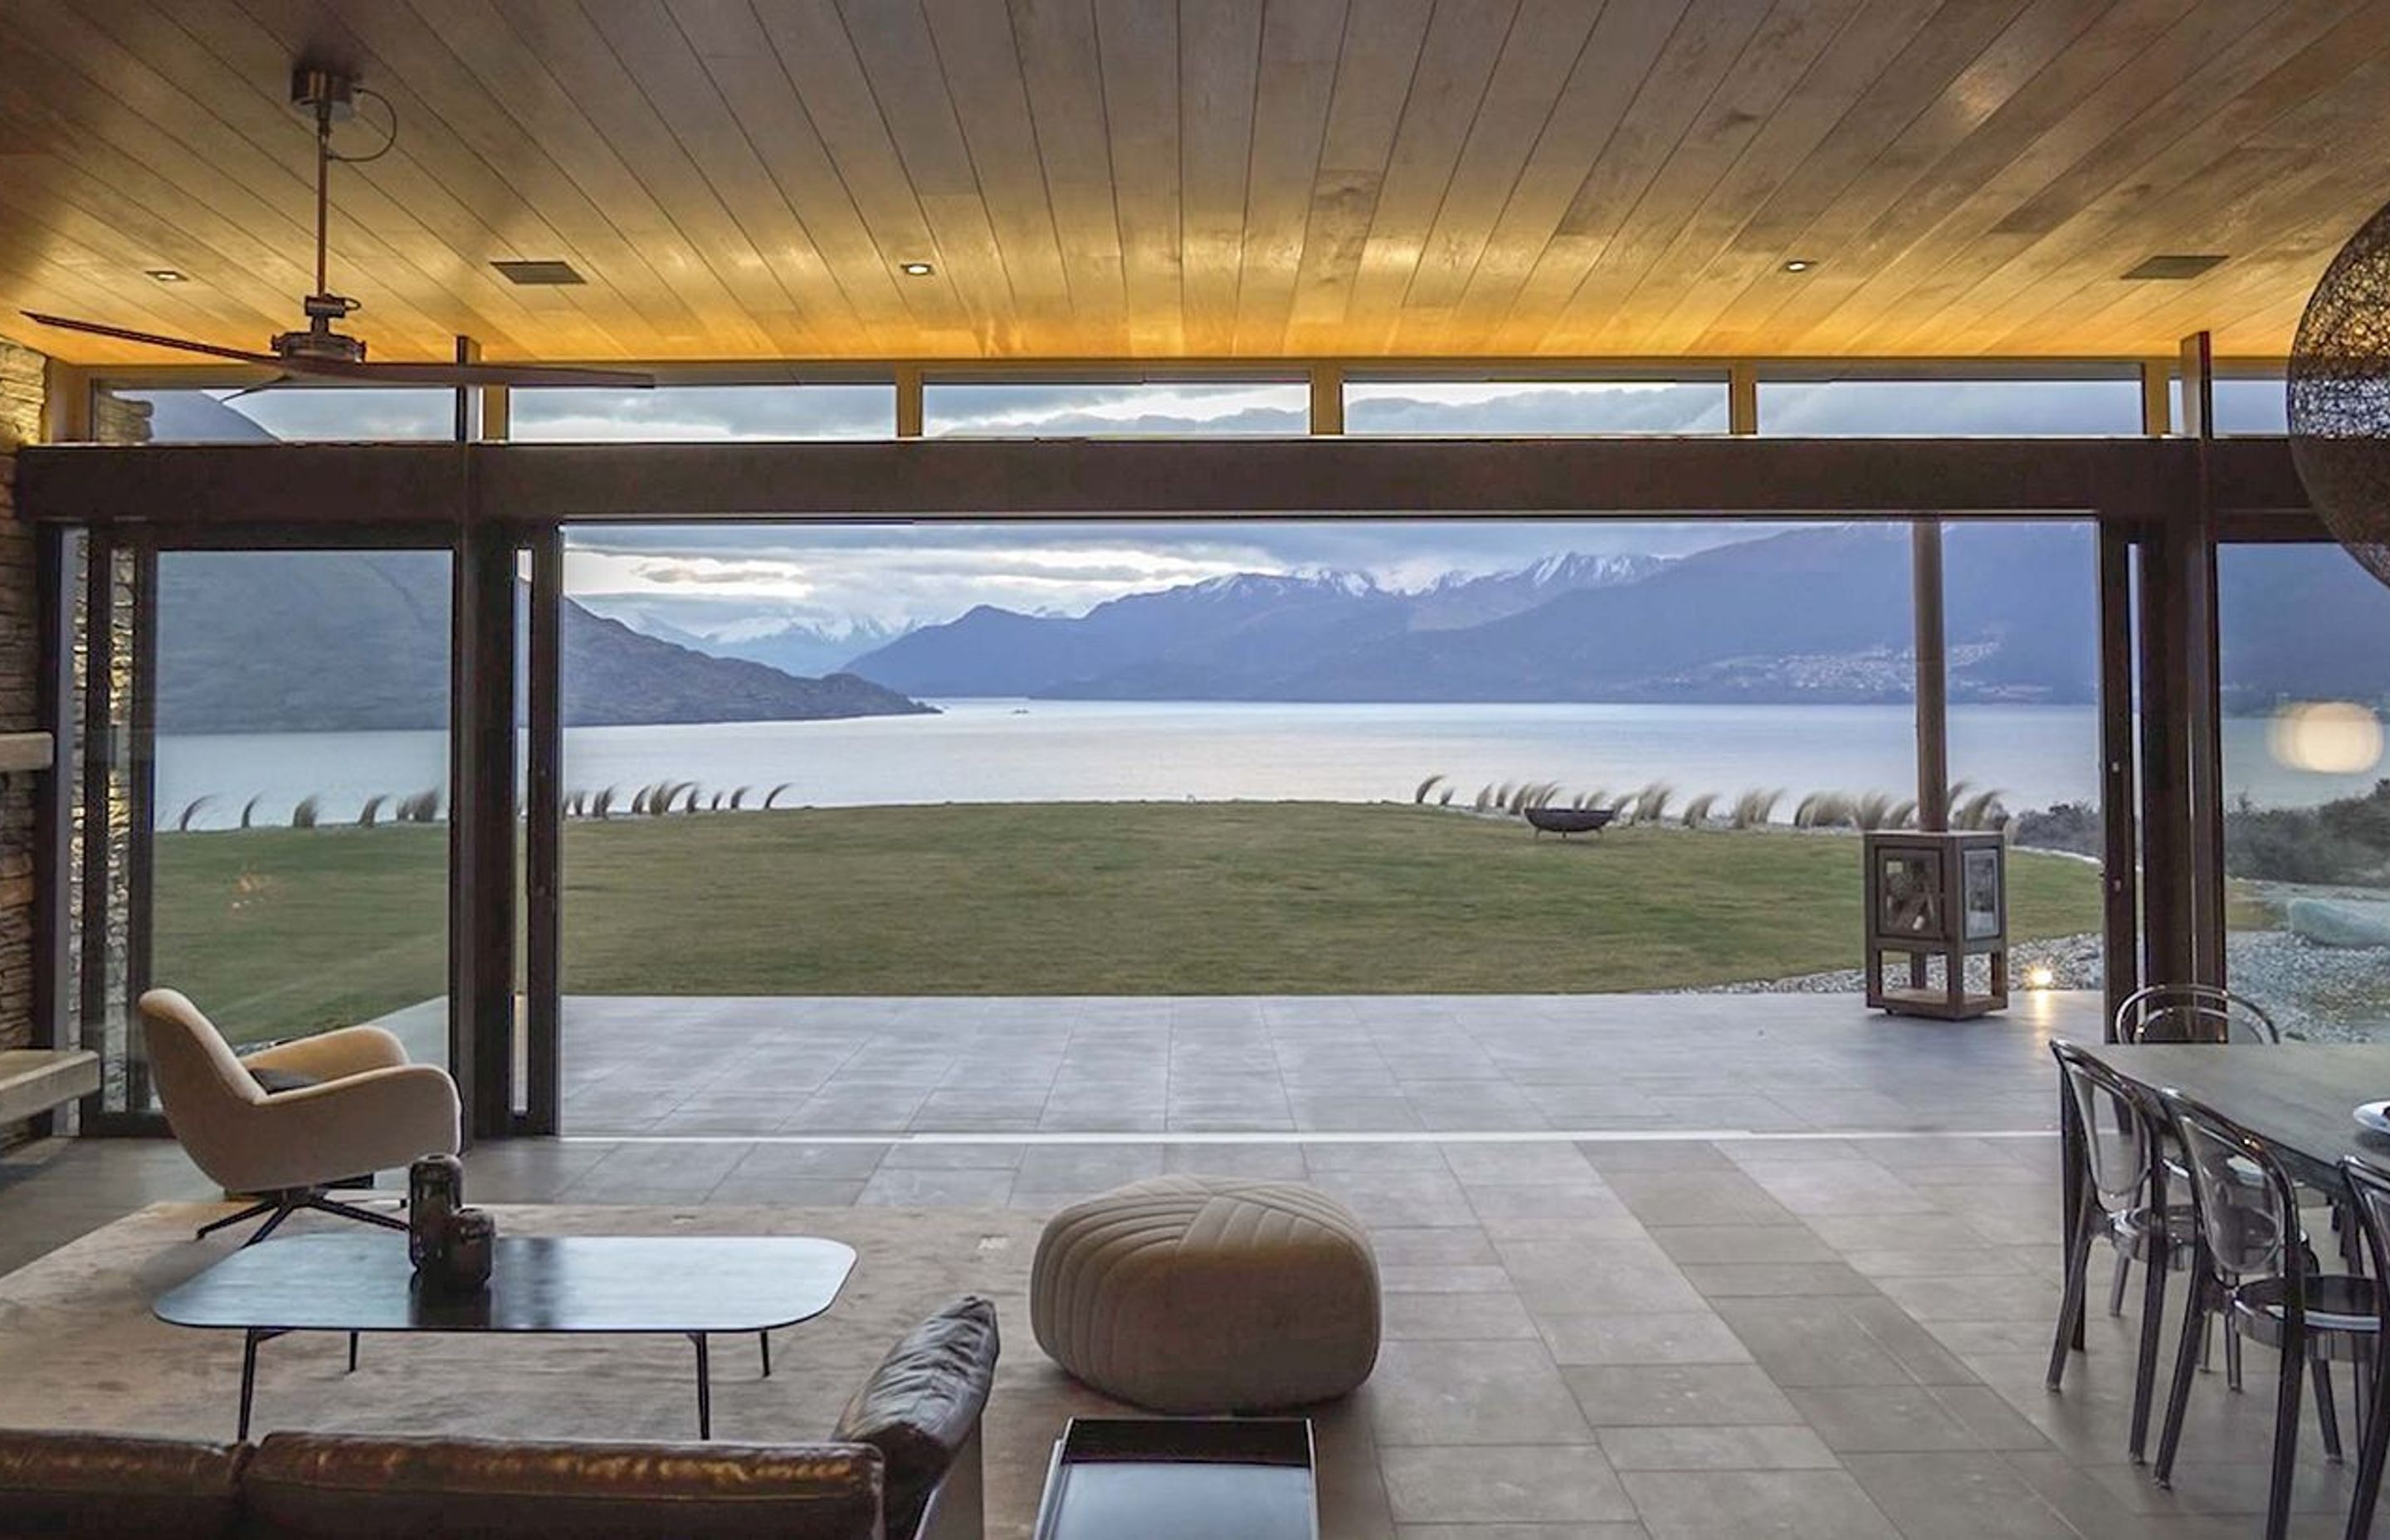 The main living area enjoys a magnificent view over Lake Wanaka, however being sited so close to the lake makes the climate very windy at times so the house has a high-performance envelope to stay warm and cosy.in the cooler months.